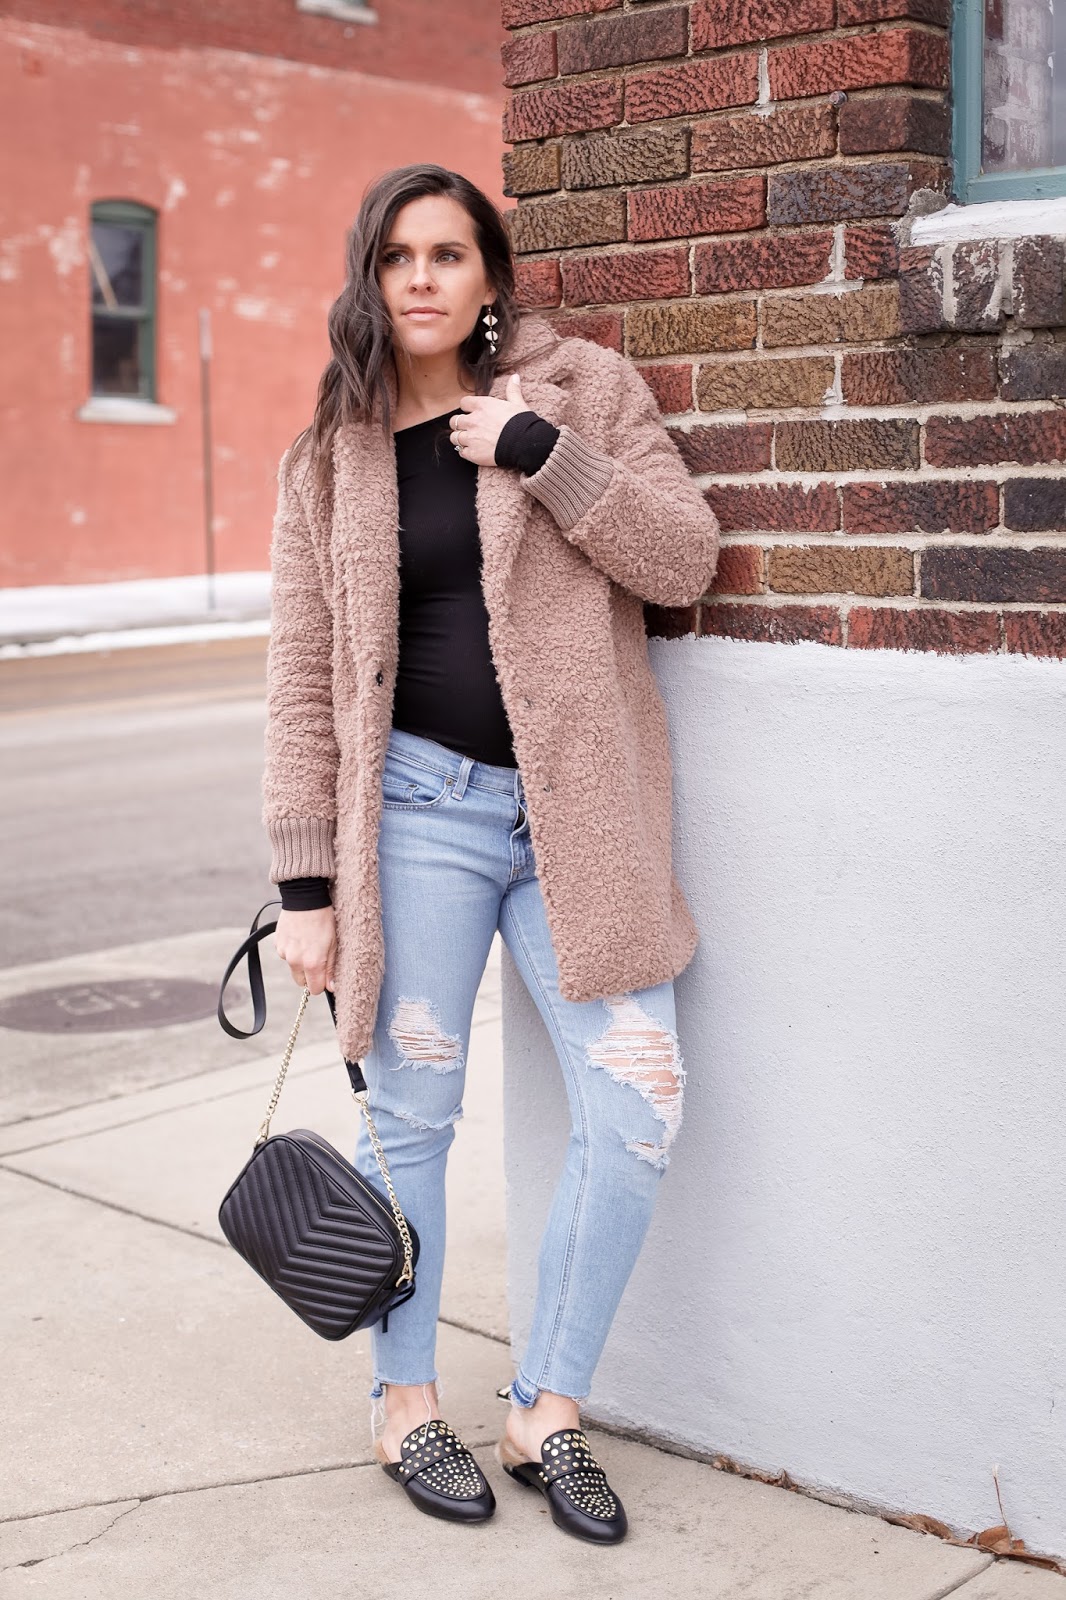 Styling the teddy coat with a bodysuit